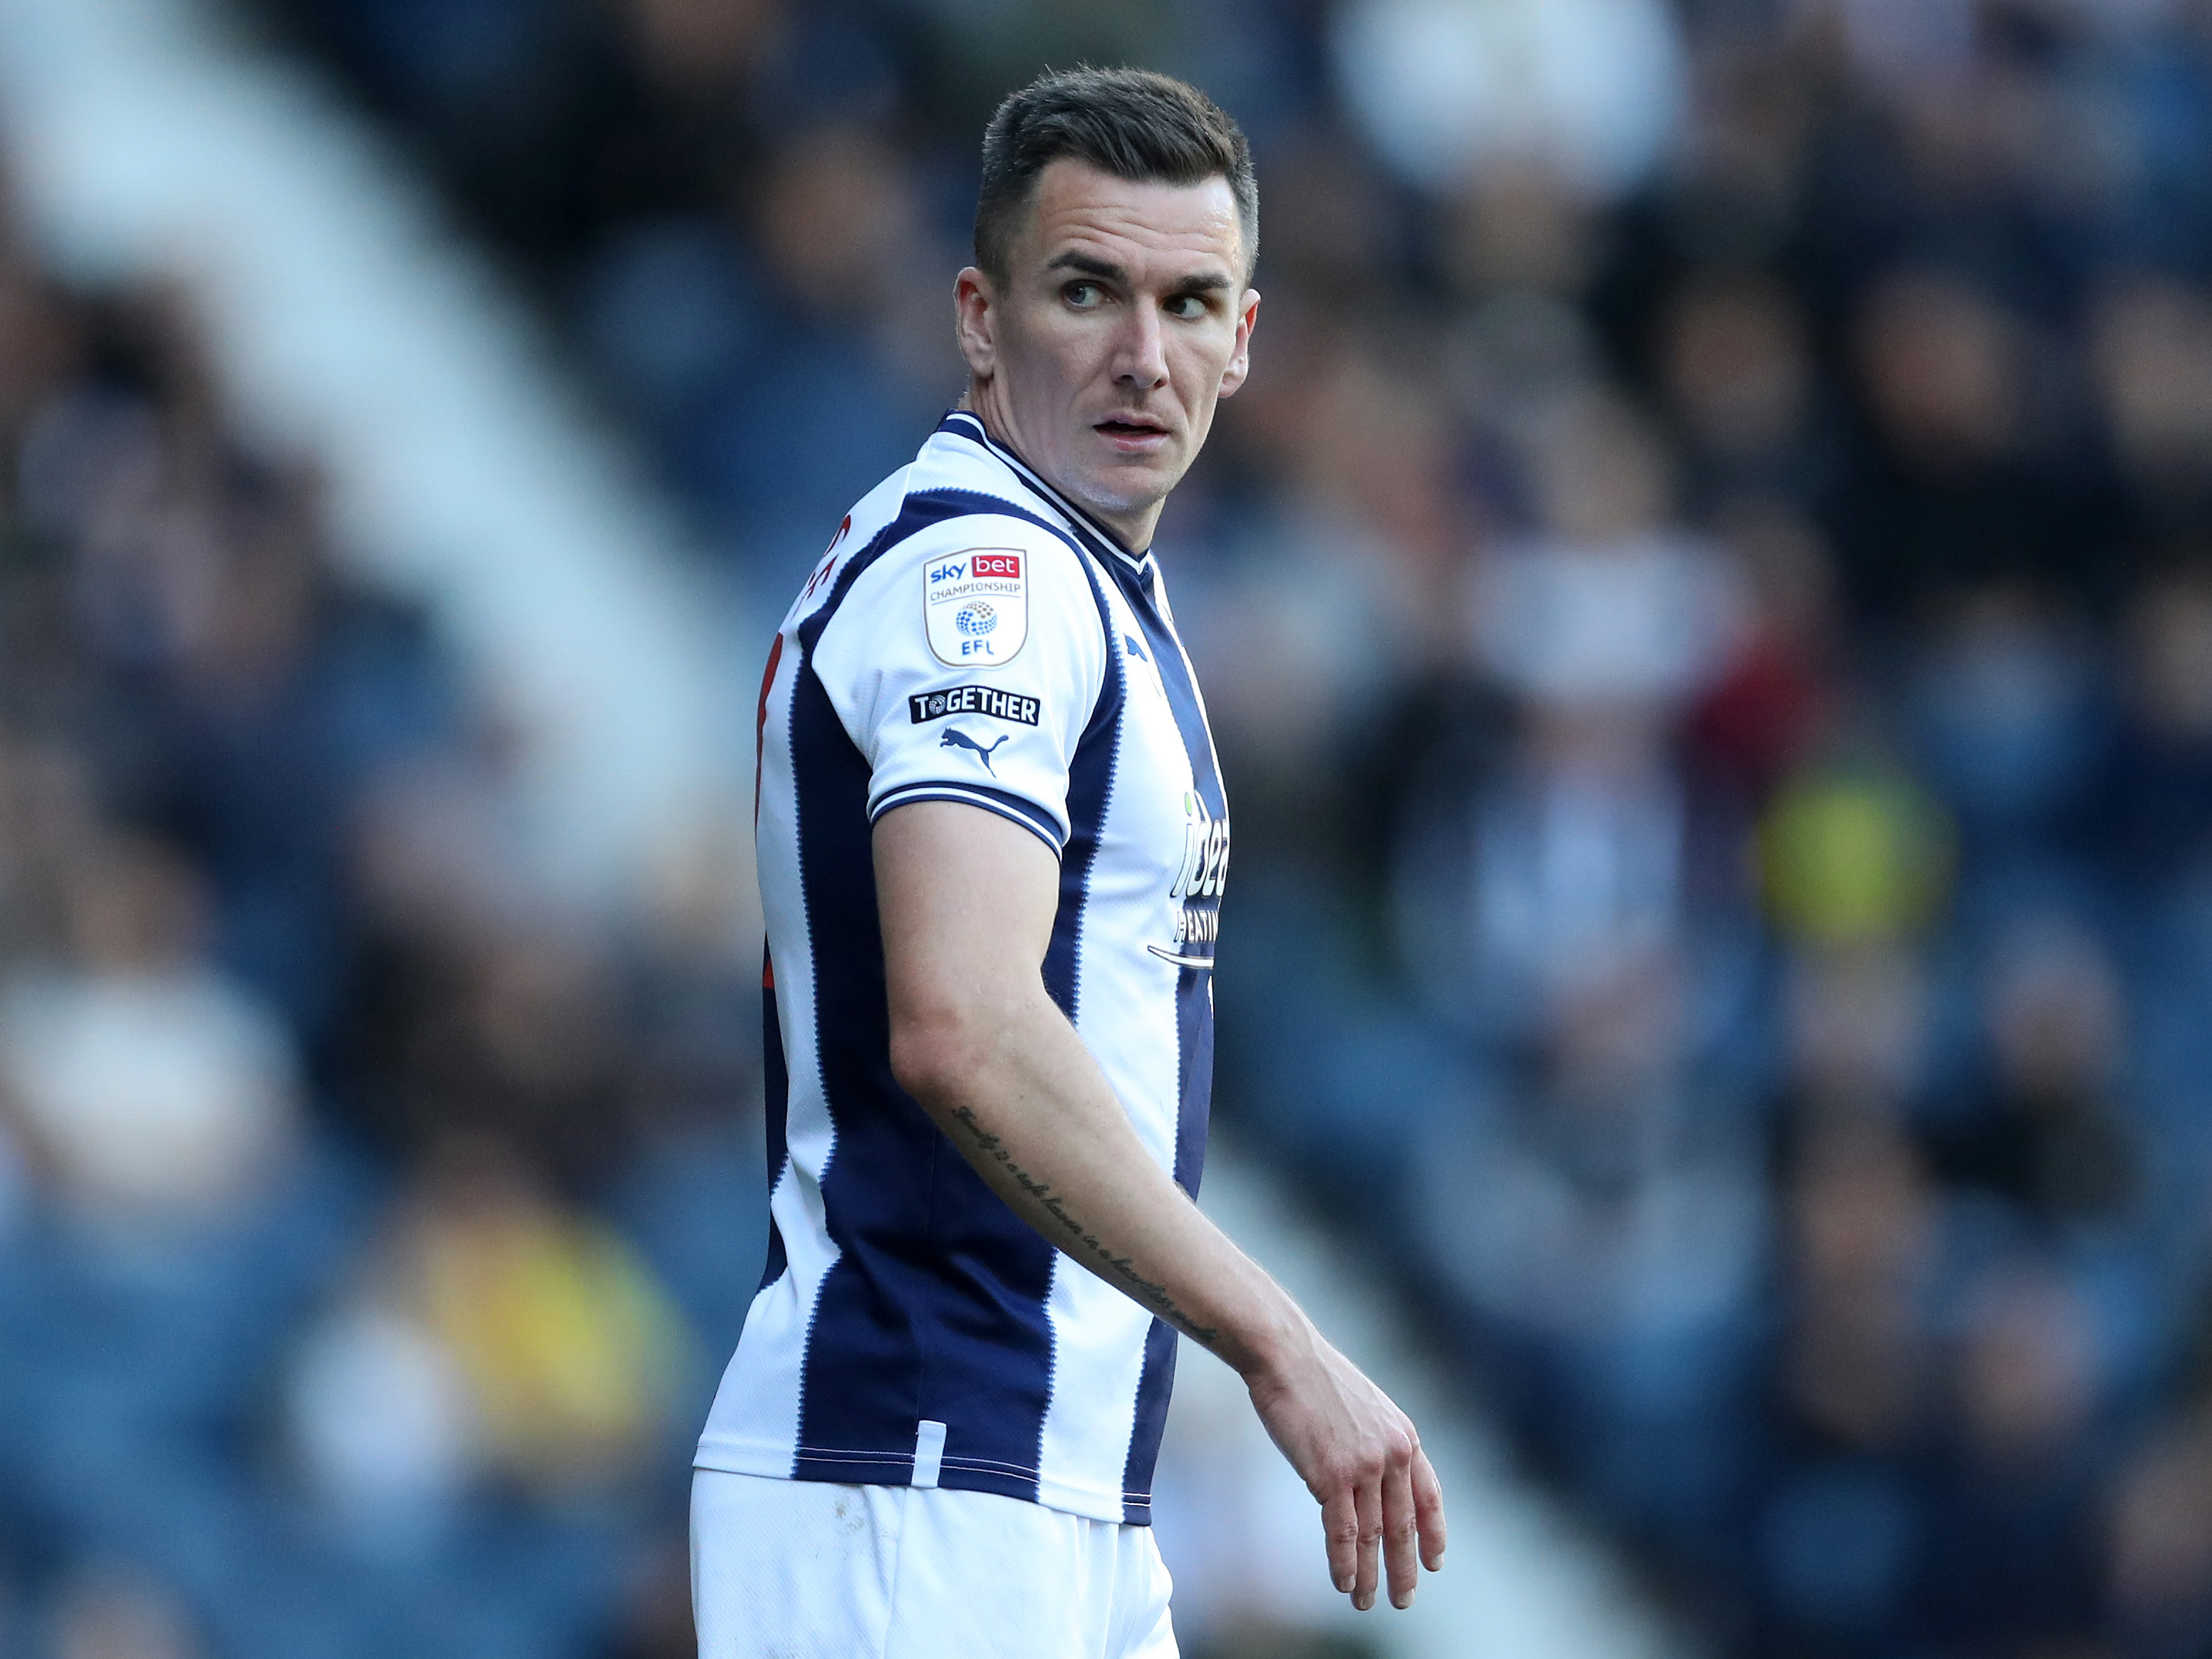 Jed Wallace in the home kit at The Hawthorns